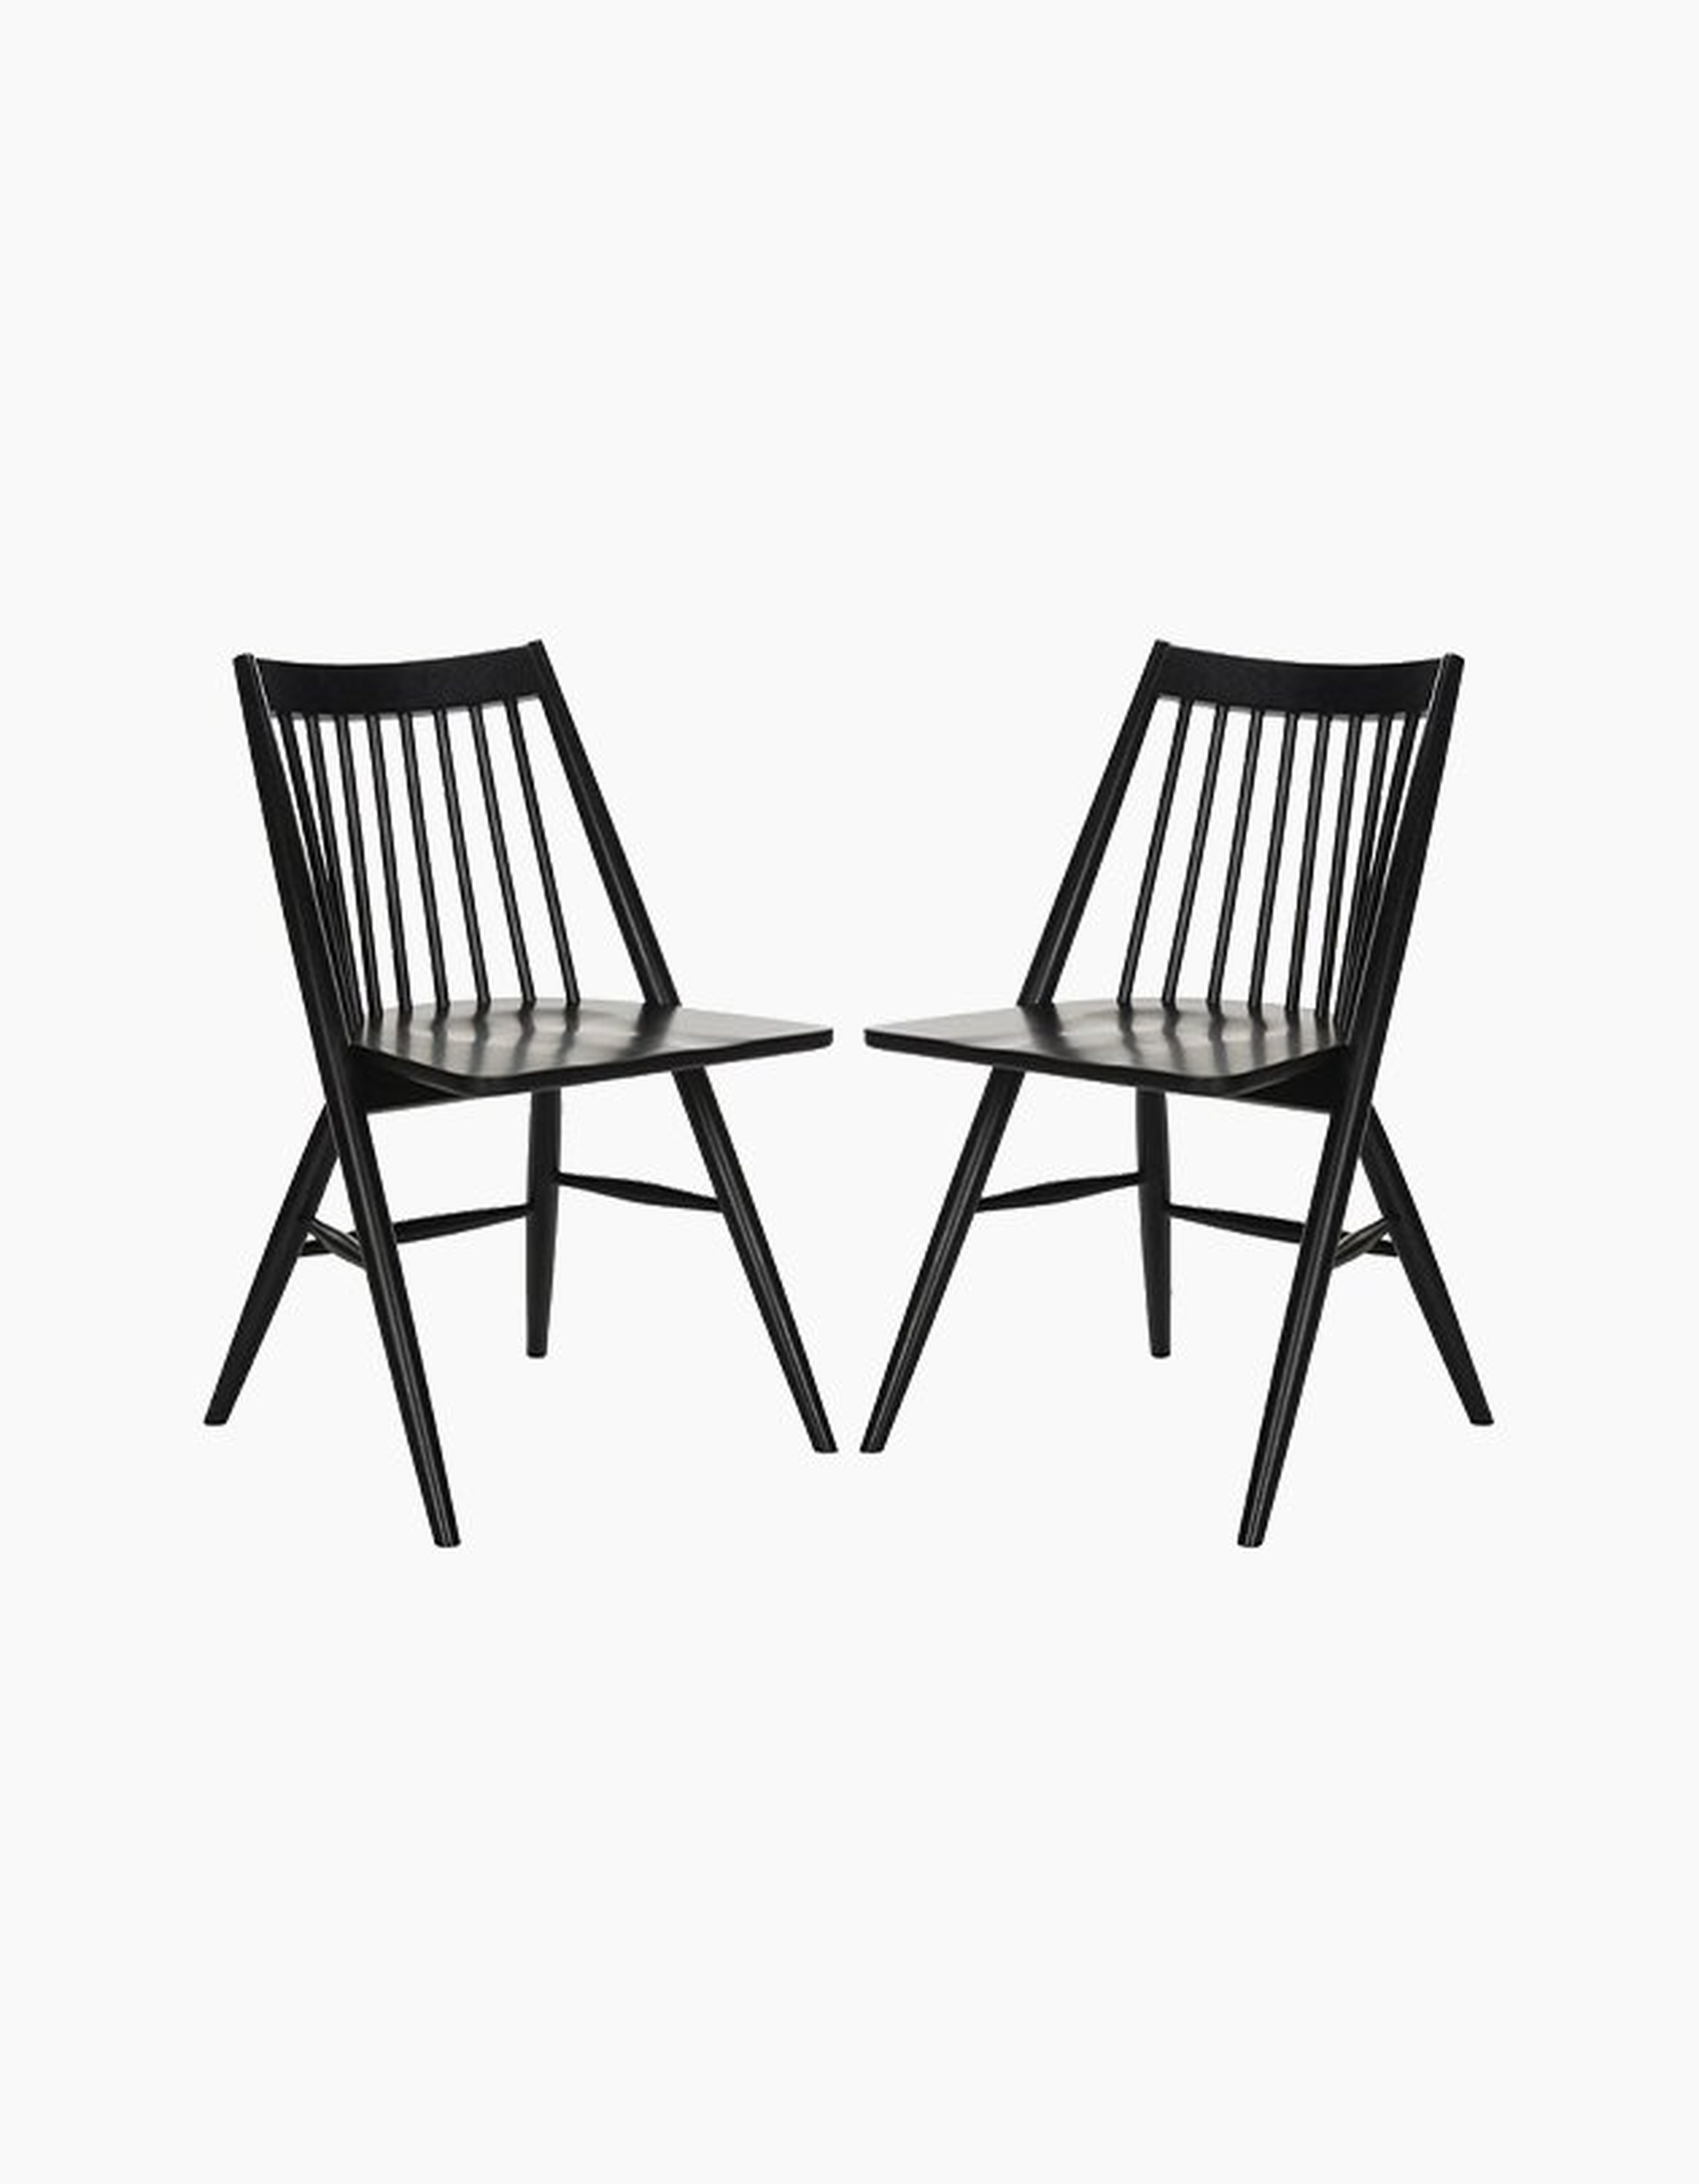 Wren 19"H Spindle Dining Chair - Black - Arlo Home - Arlo Home